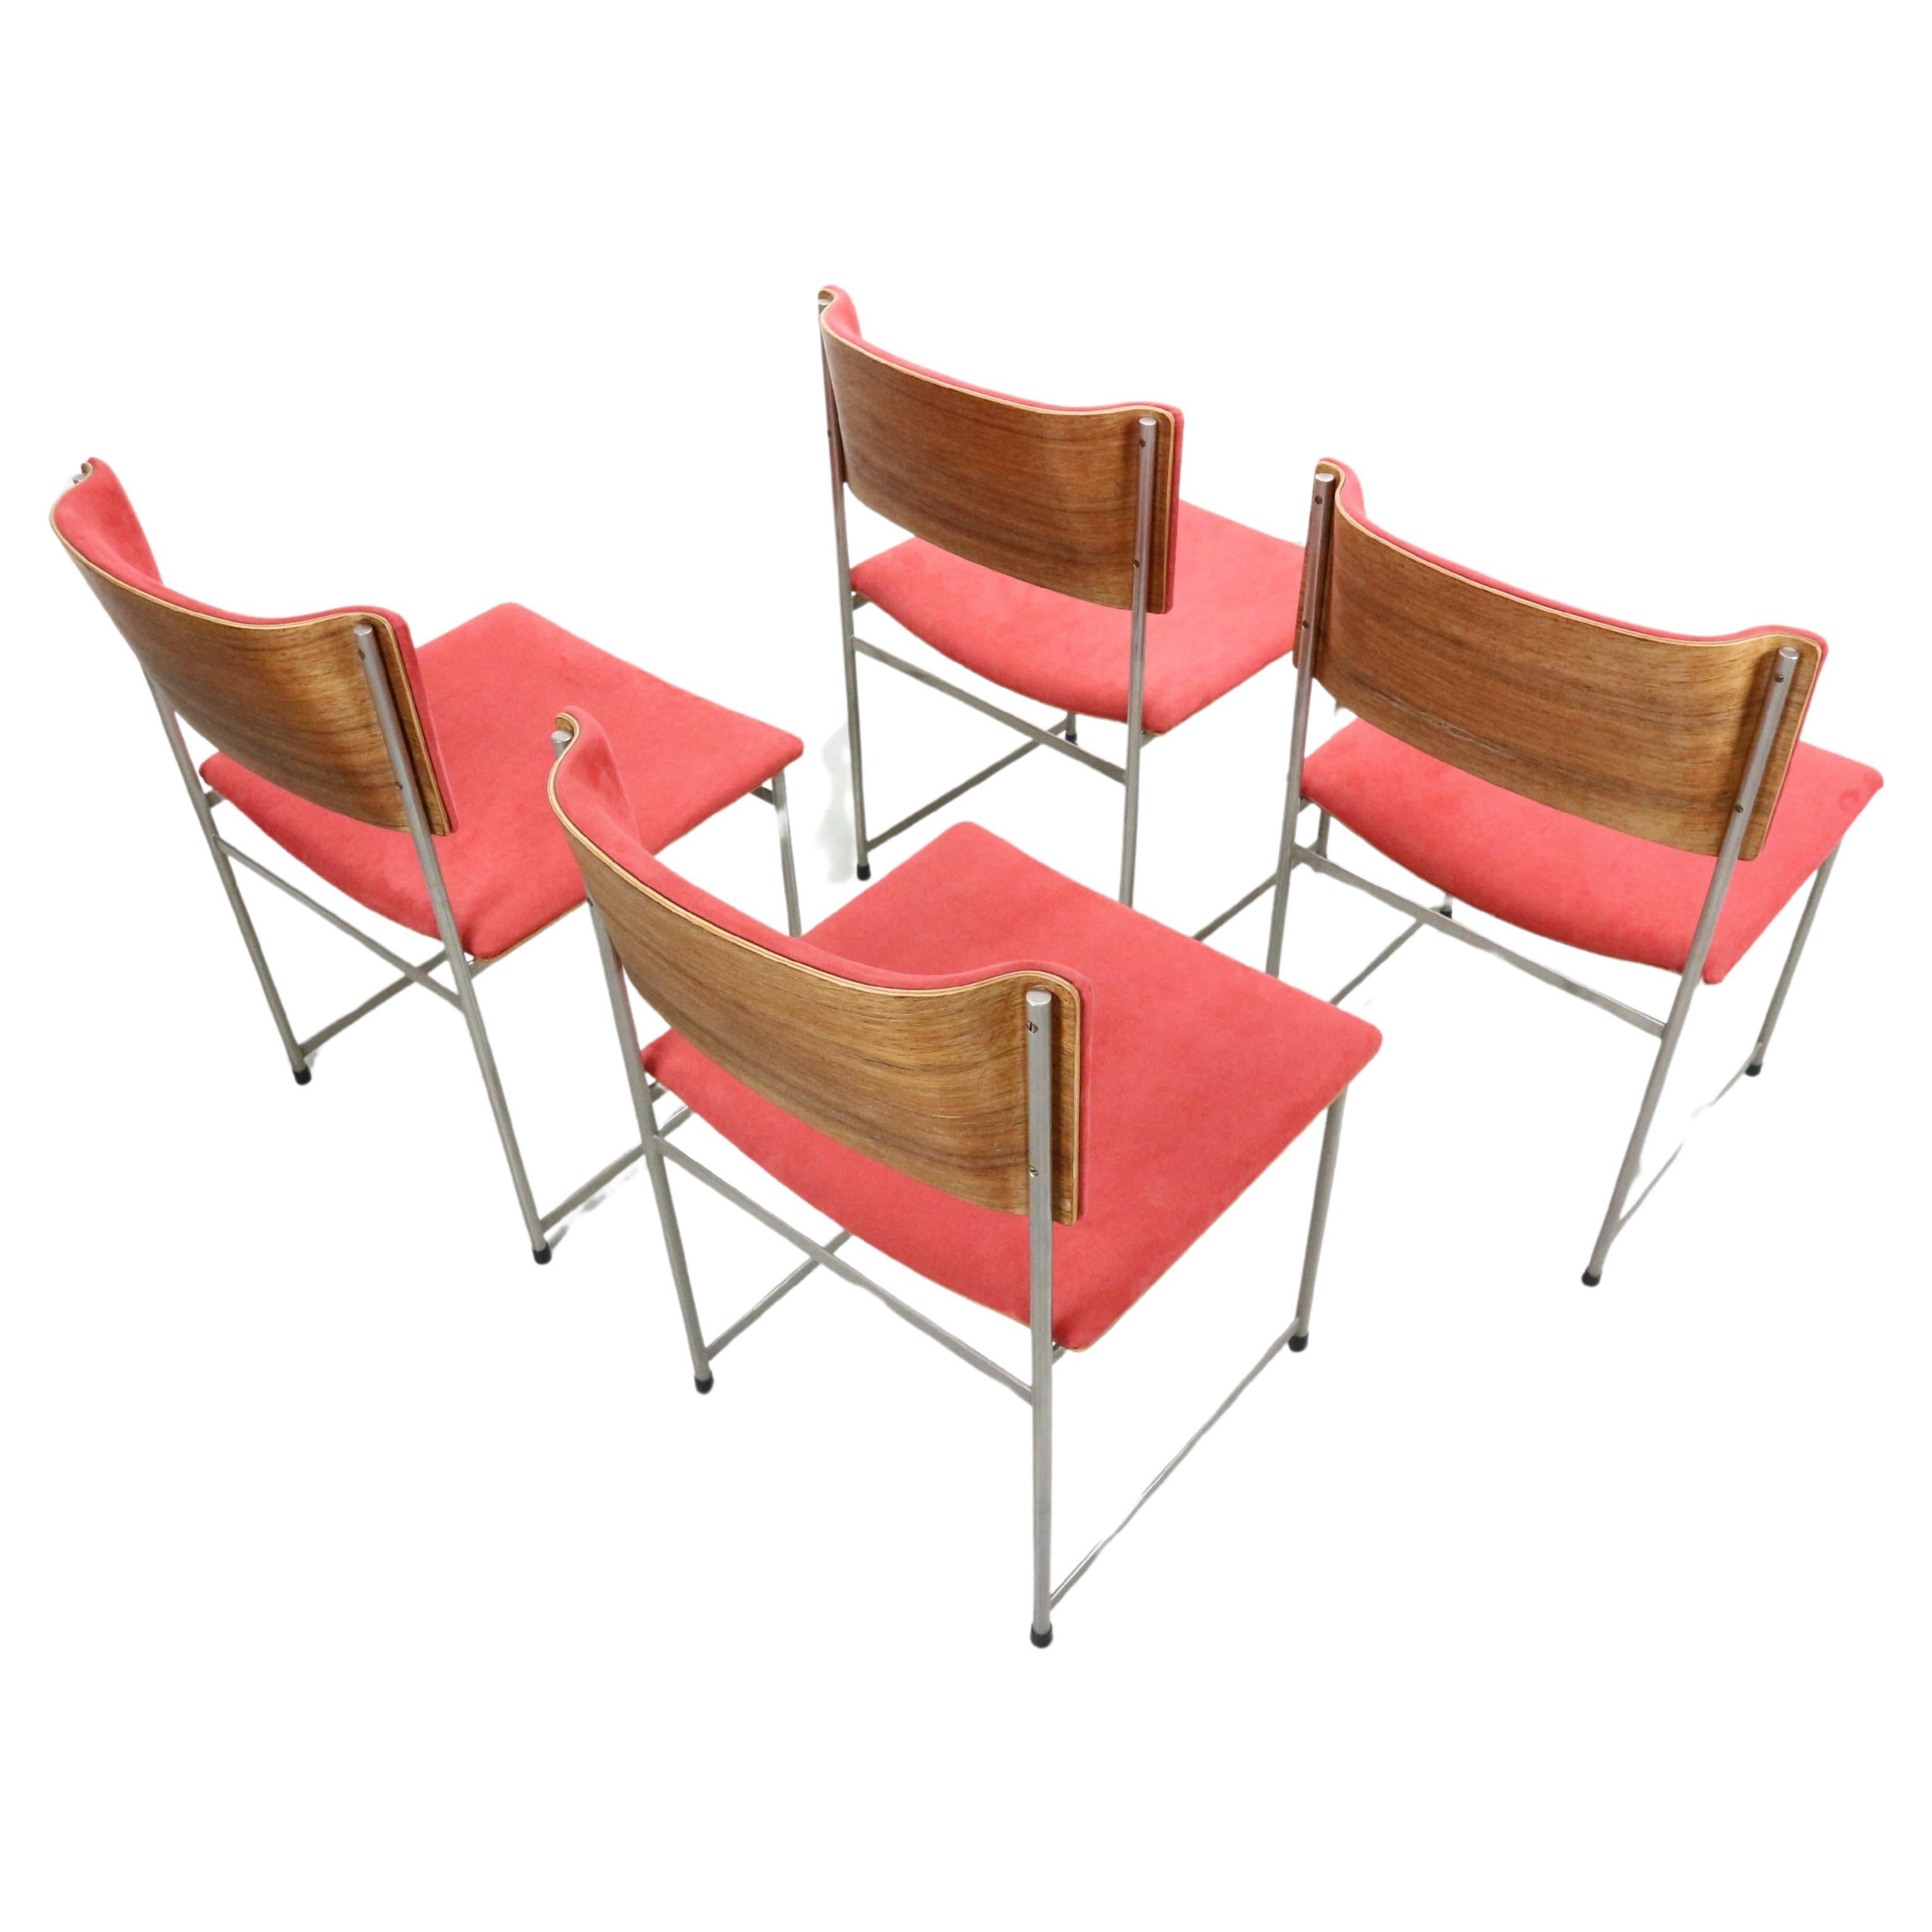 Set of 4 SM08 chairs designed in the 1950's by Cees Braakman for UMS Pastoe in the Netherlands. Nickel-plated metal frame and teak bentwood veneer backrest. The original alcantara upholstery is in good condition, some small pilling in the front side